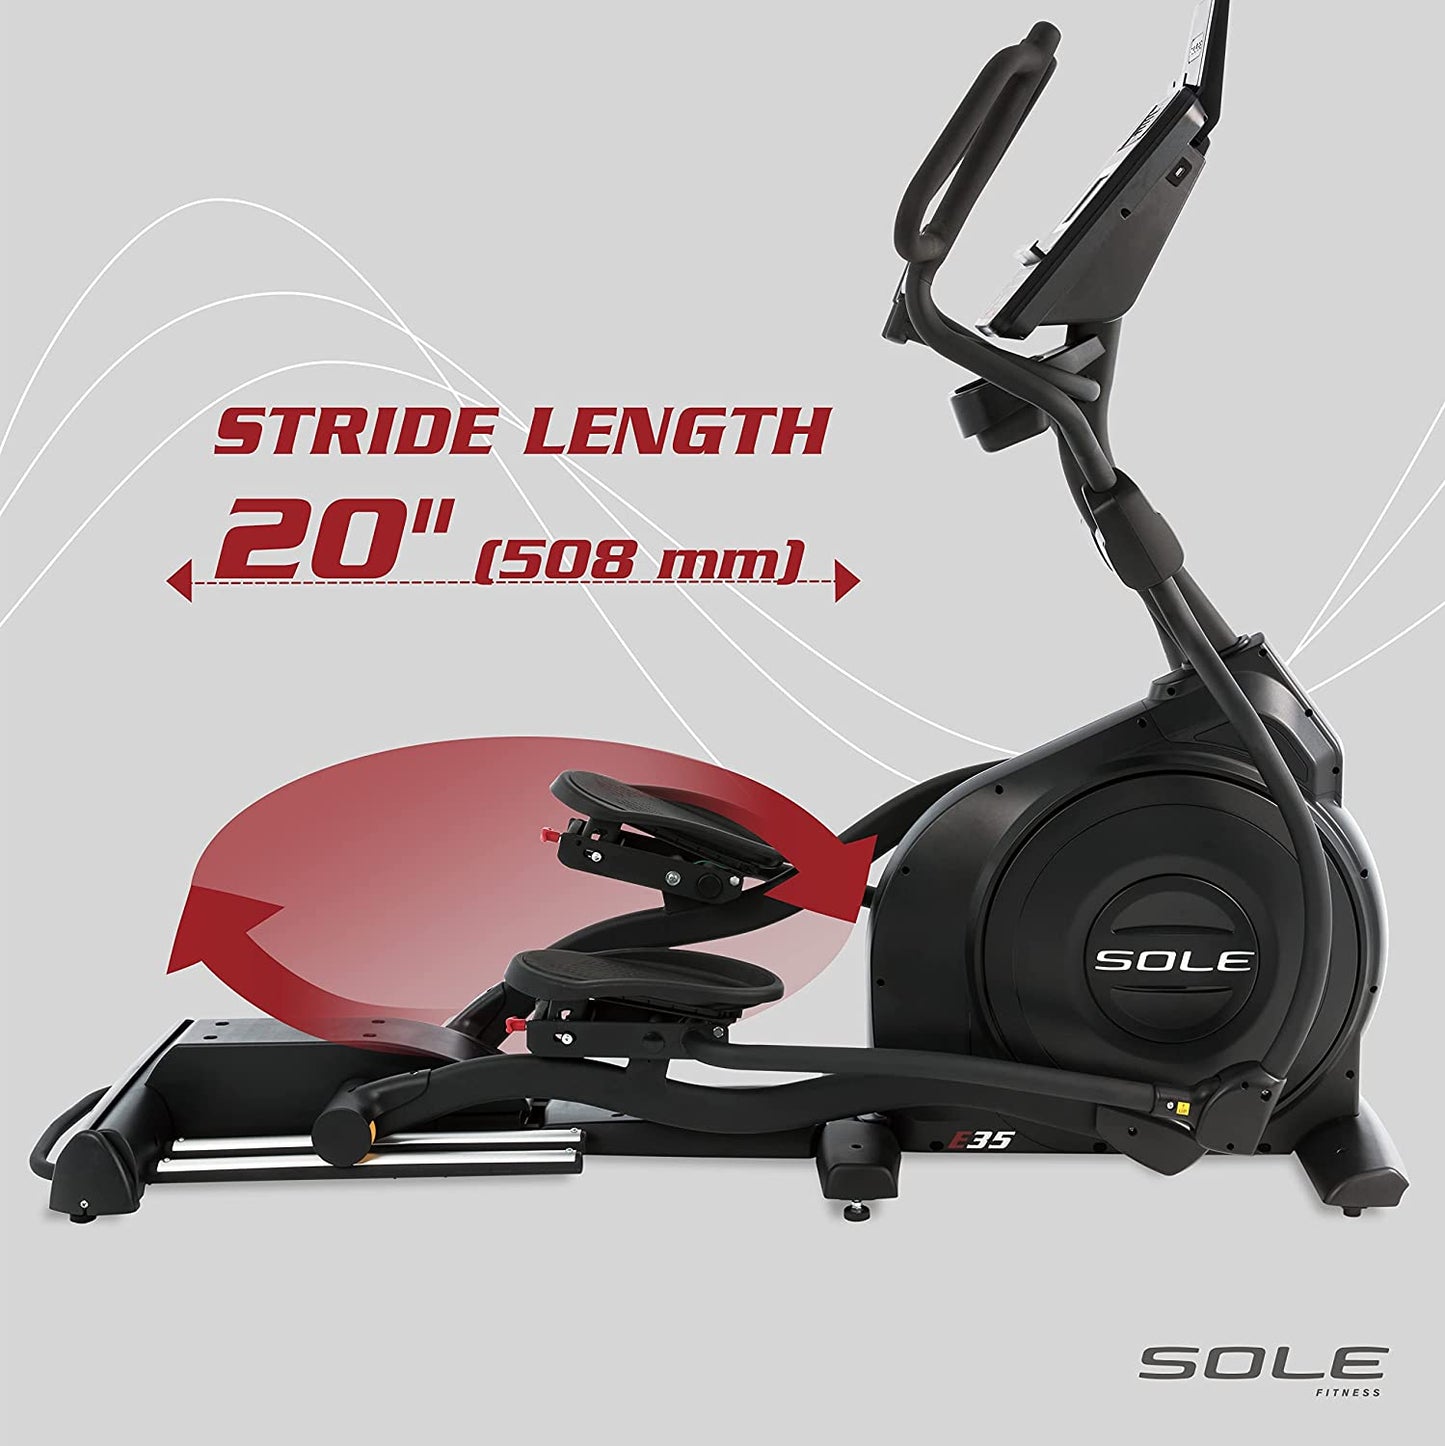 SOLE Fitness E35 Indoor Elliptical, Home and Gym Exercise Equipment, Smooth and Quiet, Versatile for Any Workout, Bluetooth and USB Compatible